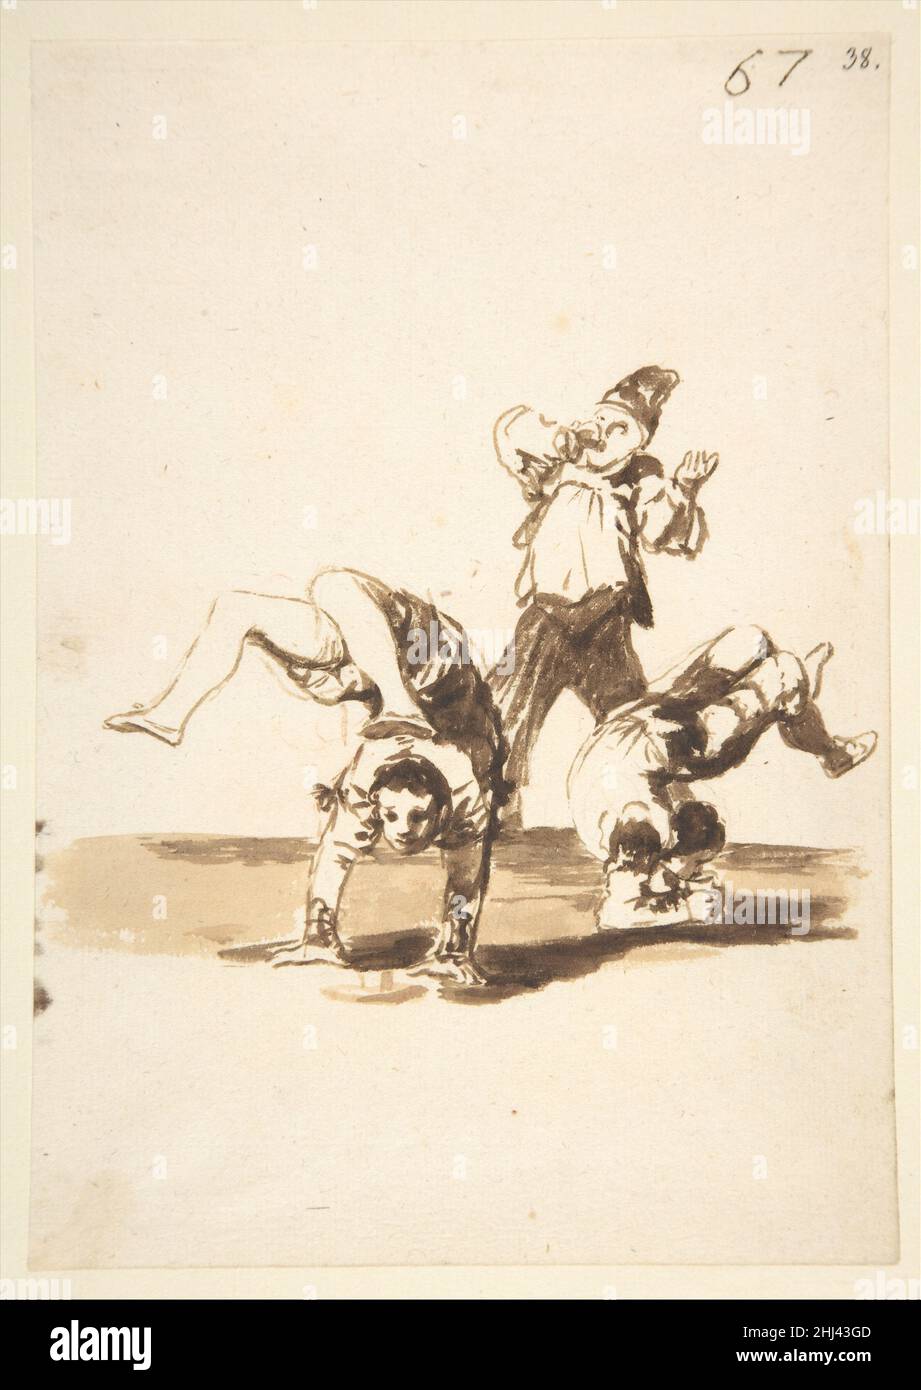 Three acrobats; page 67 from the 'Images of Spain' album (F) ca. 1812–20 Goya (Francisco de Goya y Lucientes) Spanish The elegance and freedom expressed in this drawing reveal Goya’s mastery of depicting the human form in countless poses. He first laid down light chalk marks, barely visible, as a guide to positioning the figures. The three acrobats adopt distinct poses, each involving a drinking vessel. Drinking was a subject Goya explored repeatedly, usually to convey the danger or the effects of inebriation. In the present sheet, we cannot tell if the acrobats are imbibing alcohol or if the Stock Photo